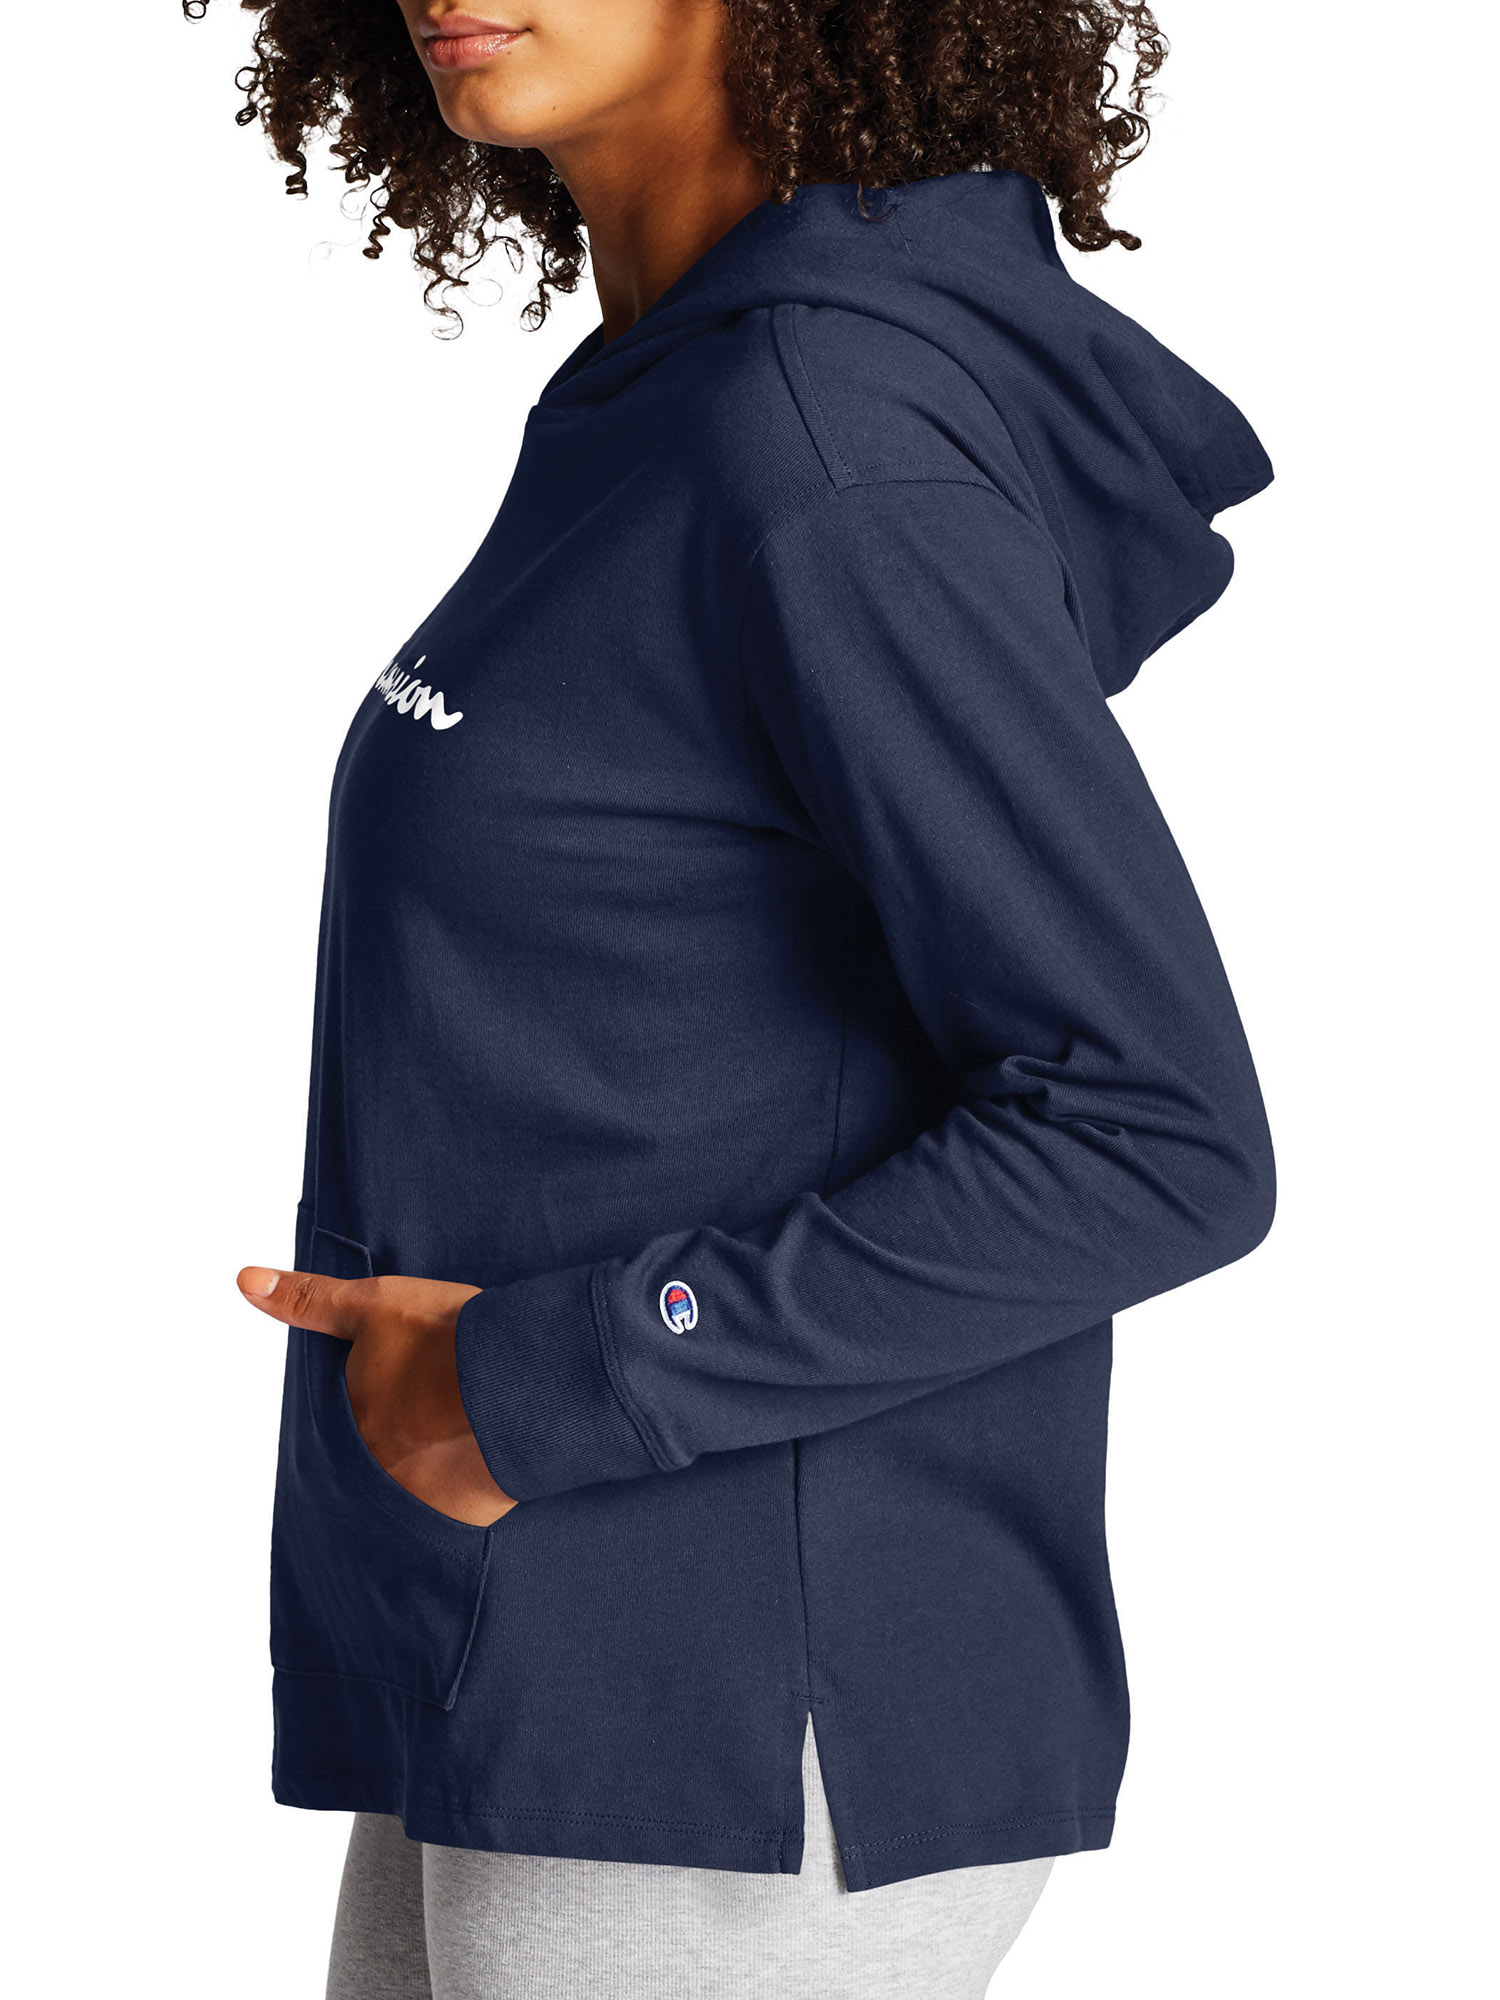 Champion Women's Middleweight Jersey Pullover Hoodie - image 3 of 5